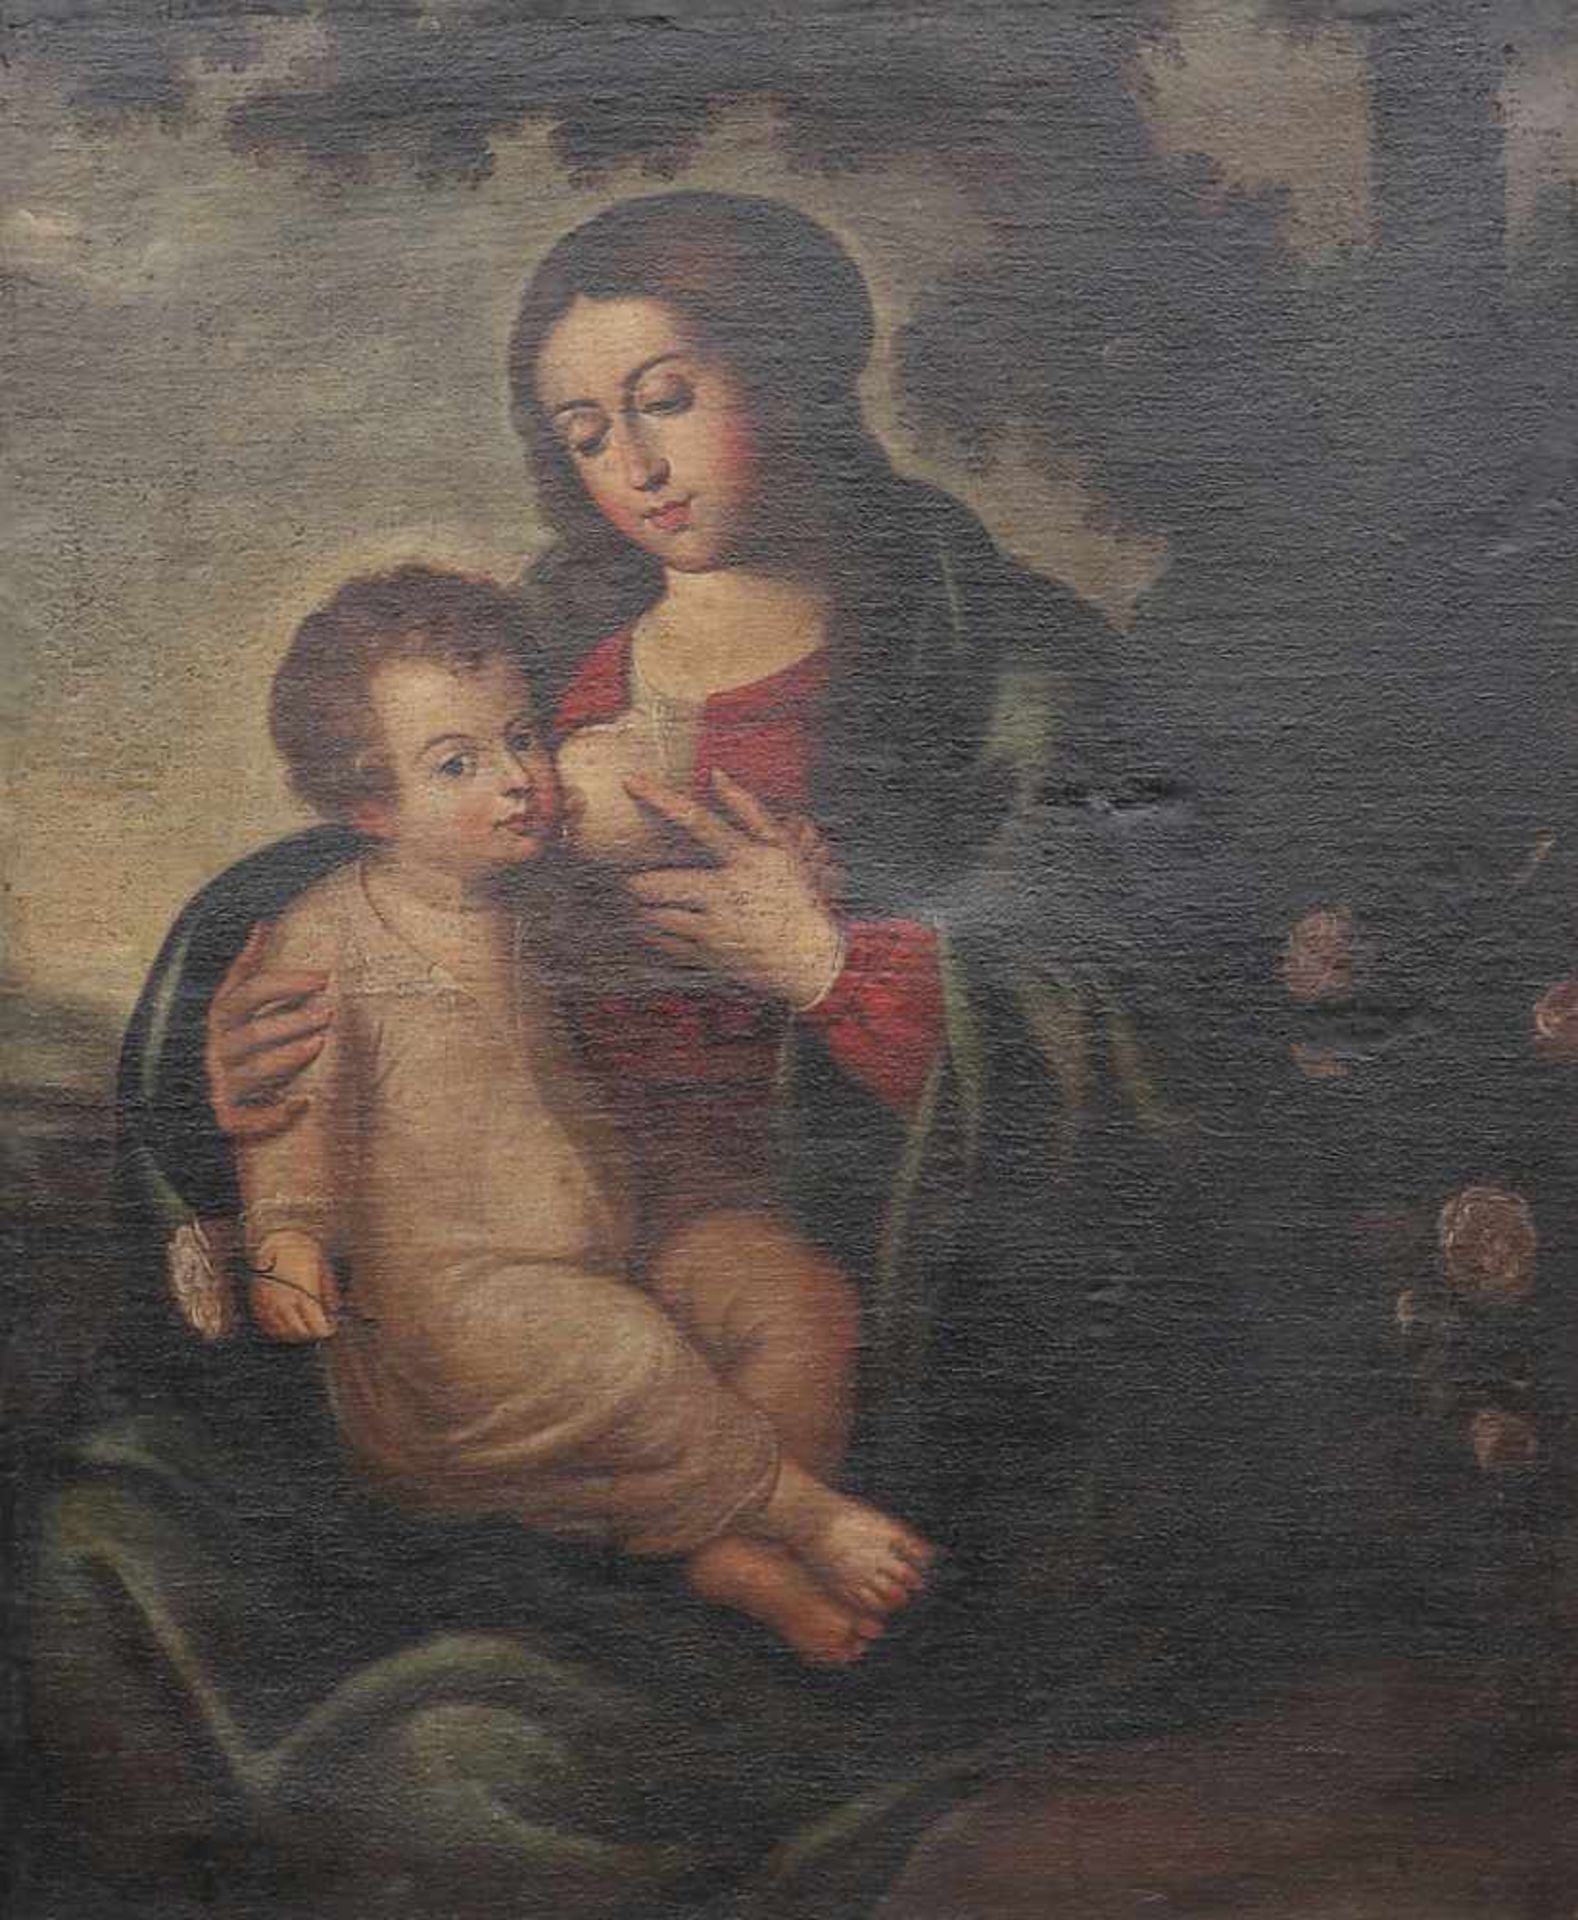 SPANISH SCHOOL, 17TH CENTURY. Madonna and Child.Oil on canvas Popular composition in the 17th